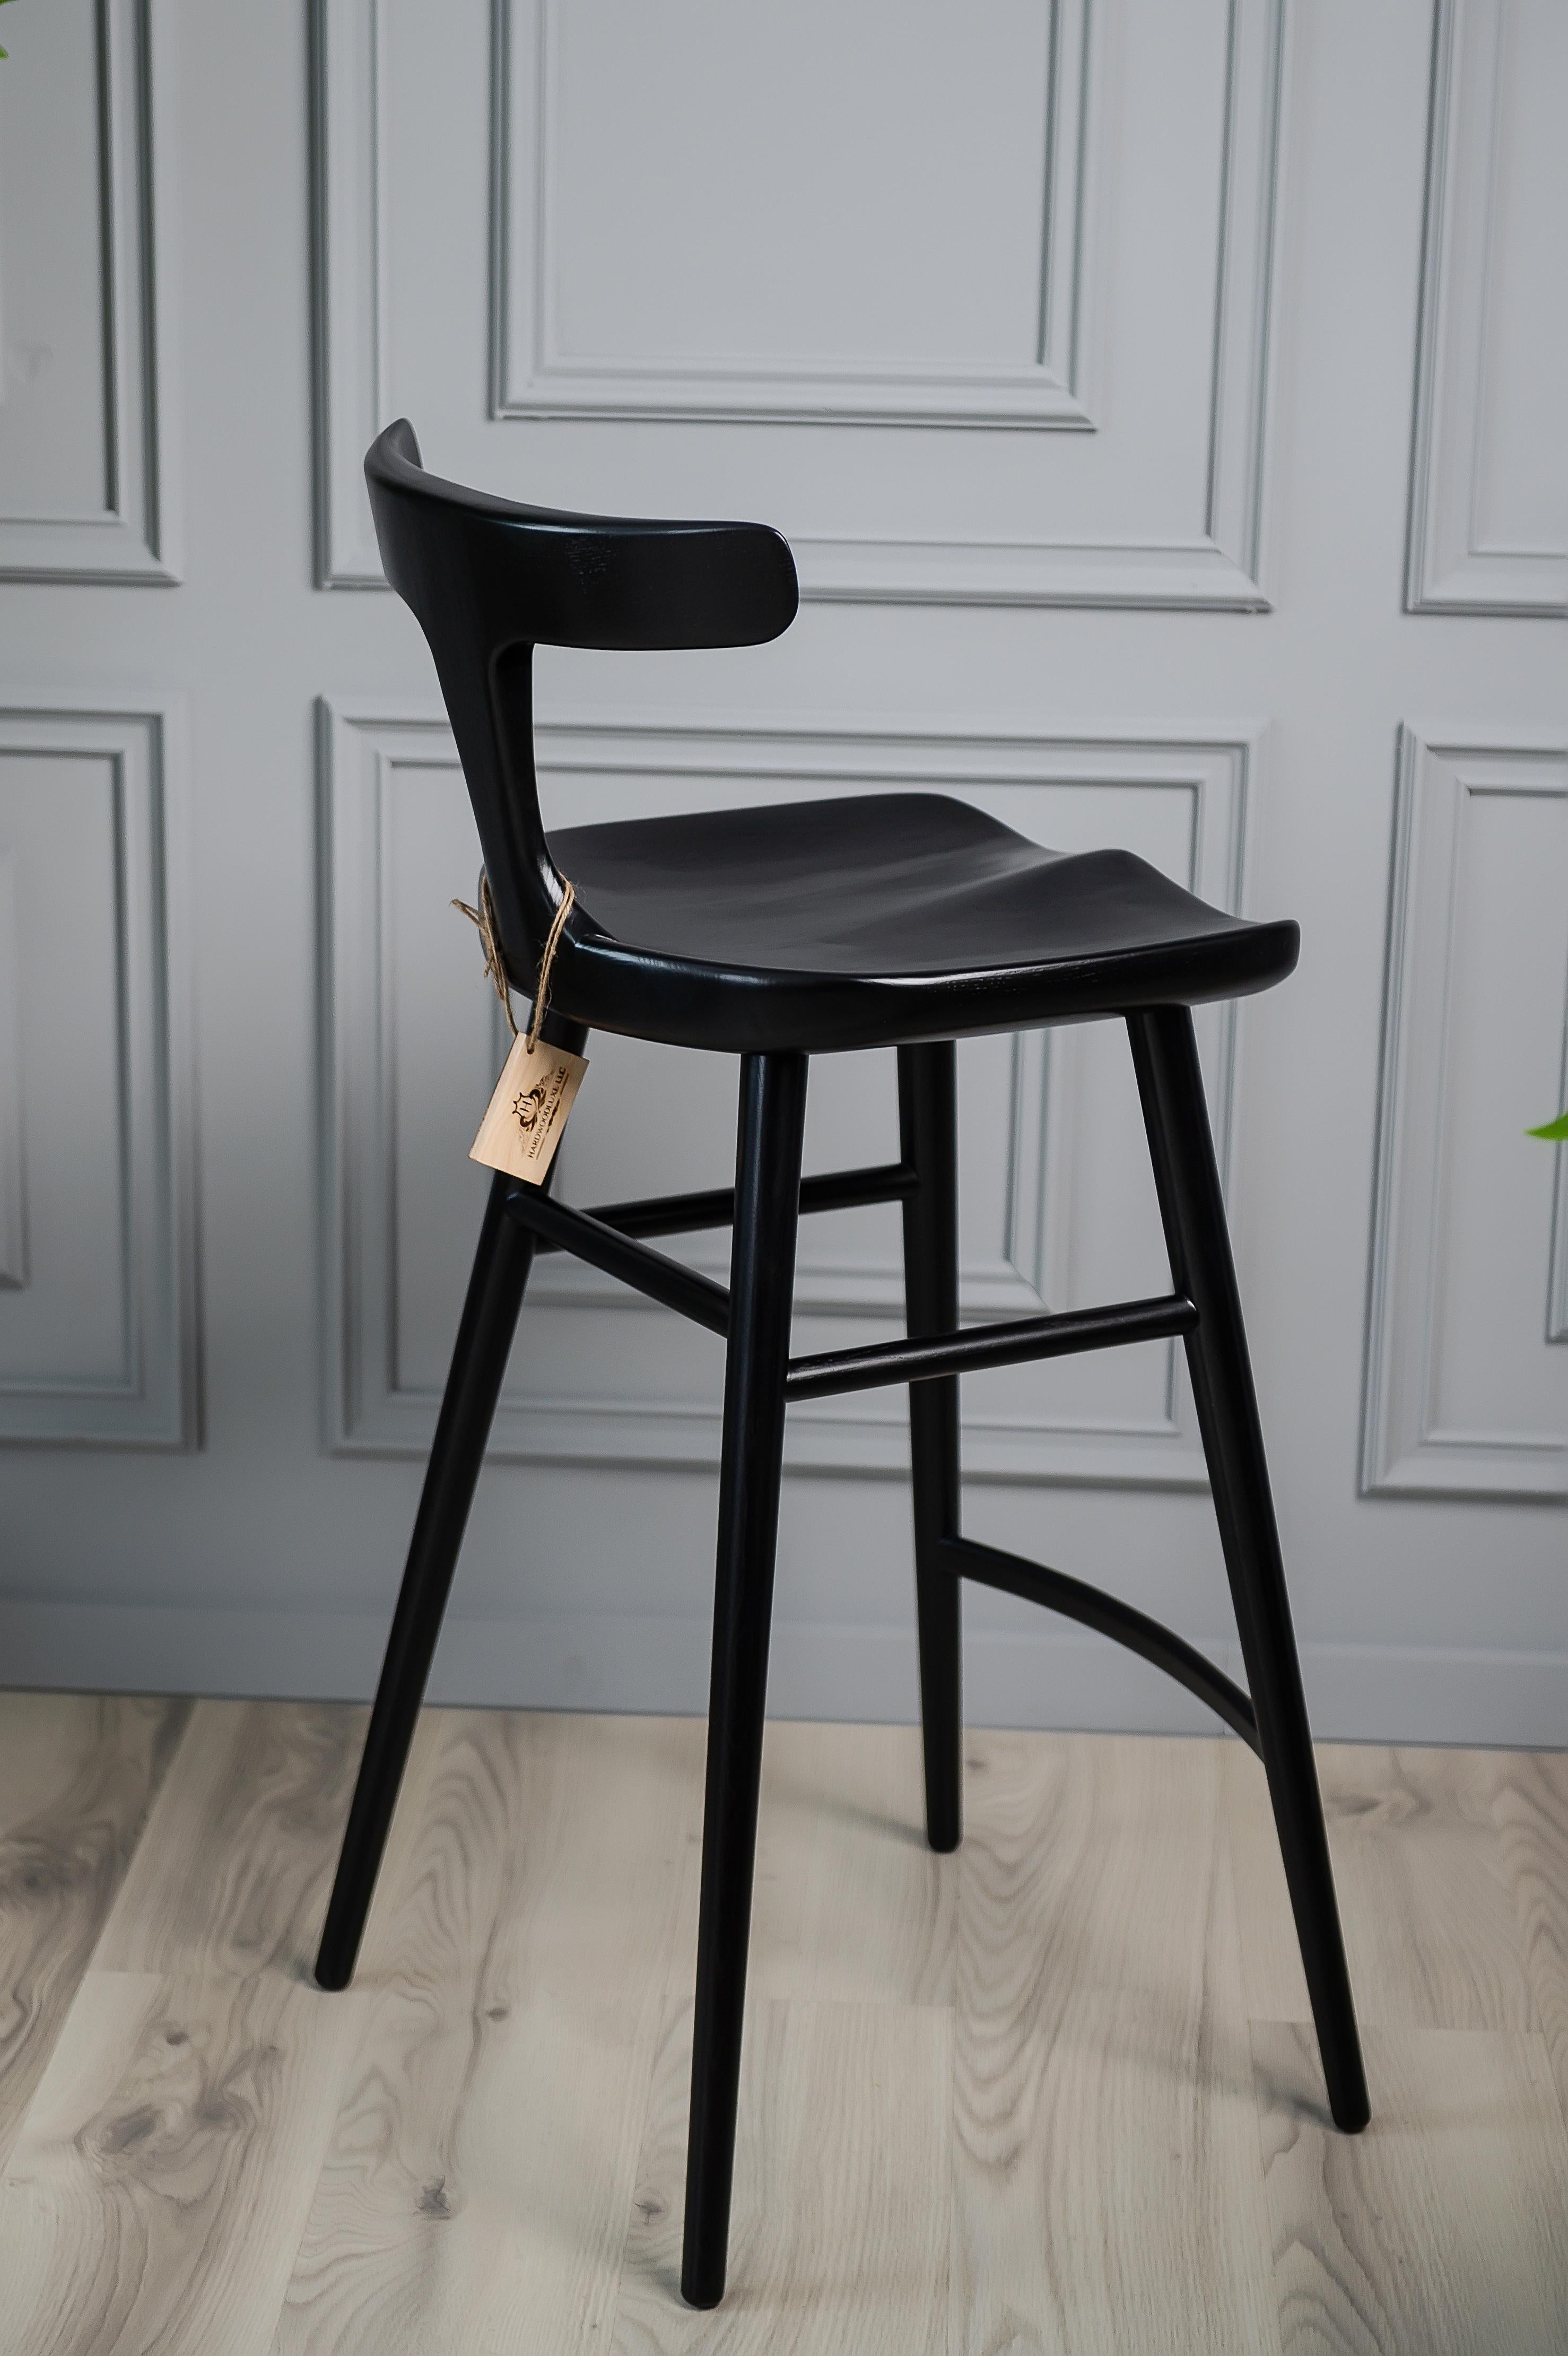 The alma bar stool is perfect for any bar or leisure area of your mom. This modern stained bar stool will help to entertain guests while adding a style functionality that you can’t miss. Made with ash wood, the alma bar stool will last generation